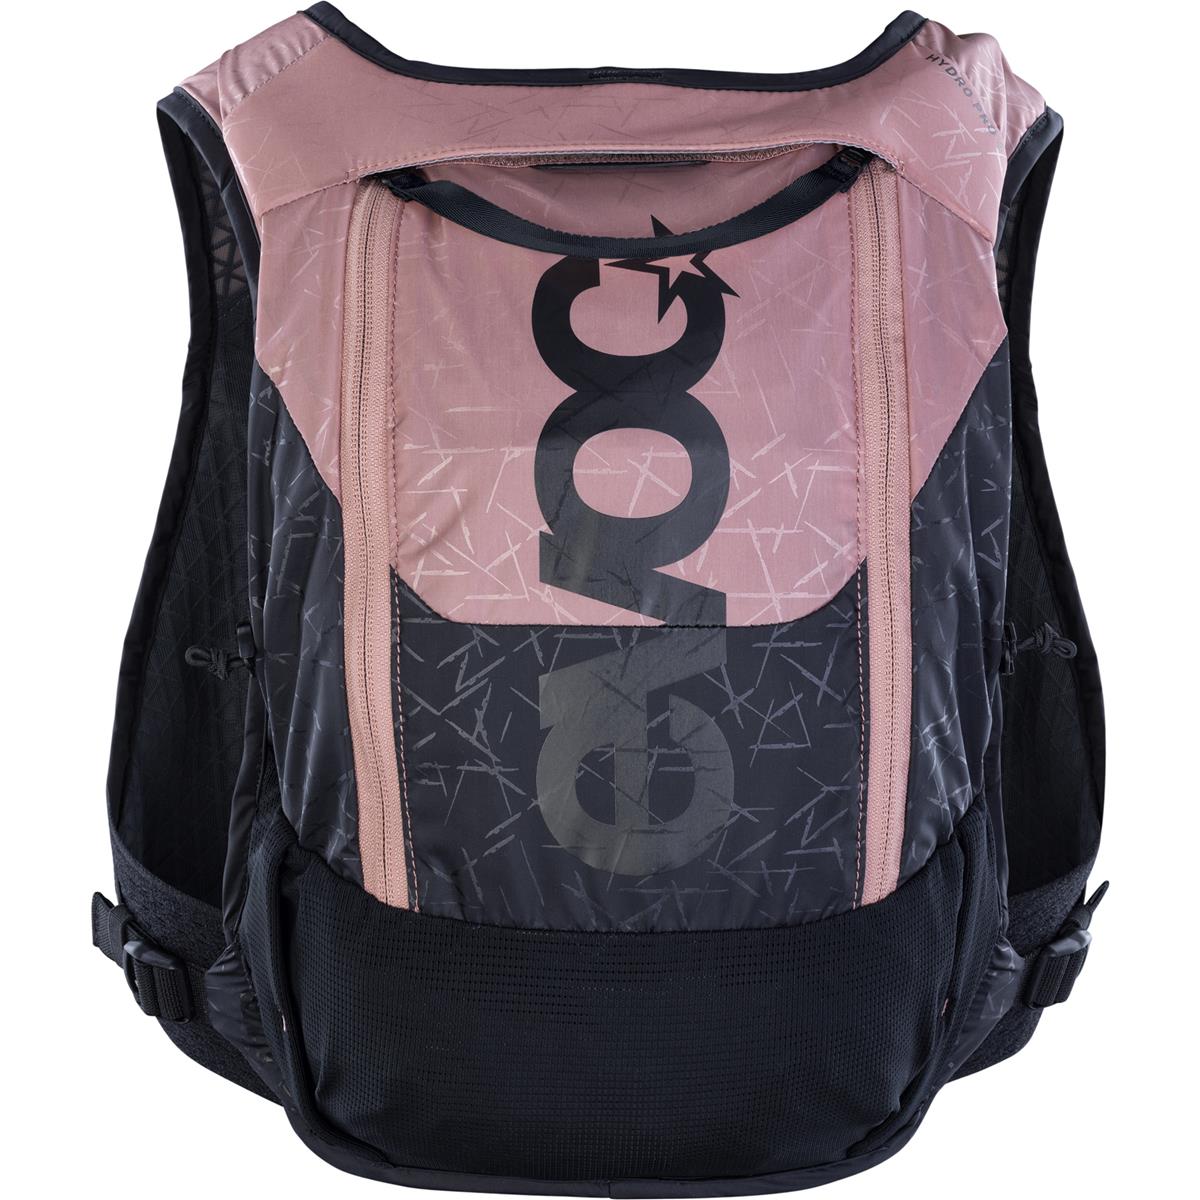 Evoc Backpack with Hydration System Compartment Hydro Pro 6 Dusty Pink/Black